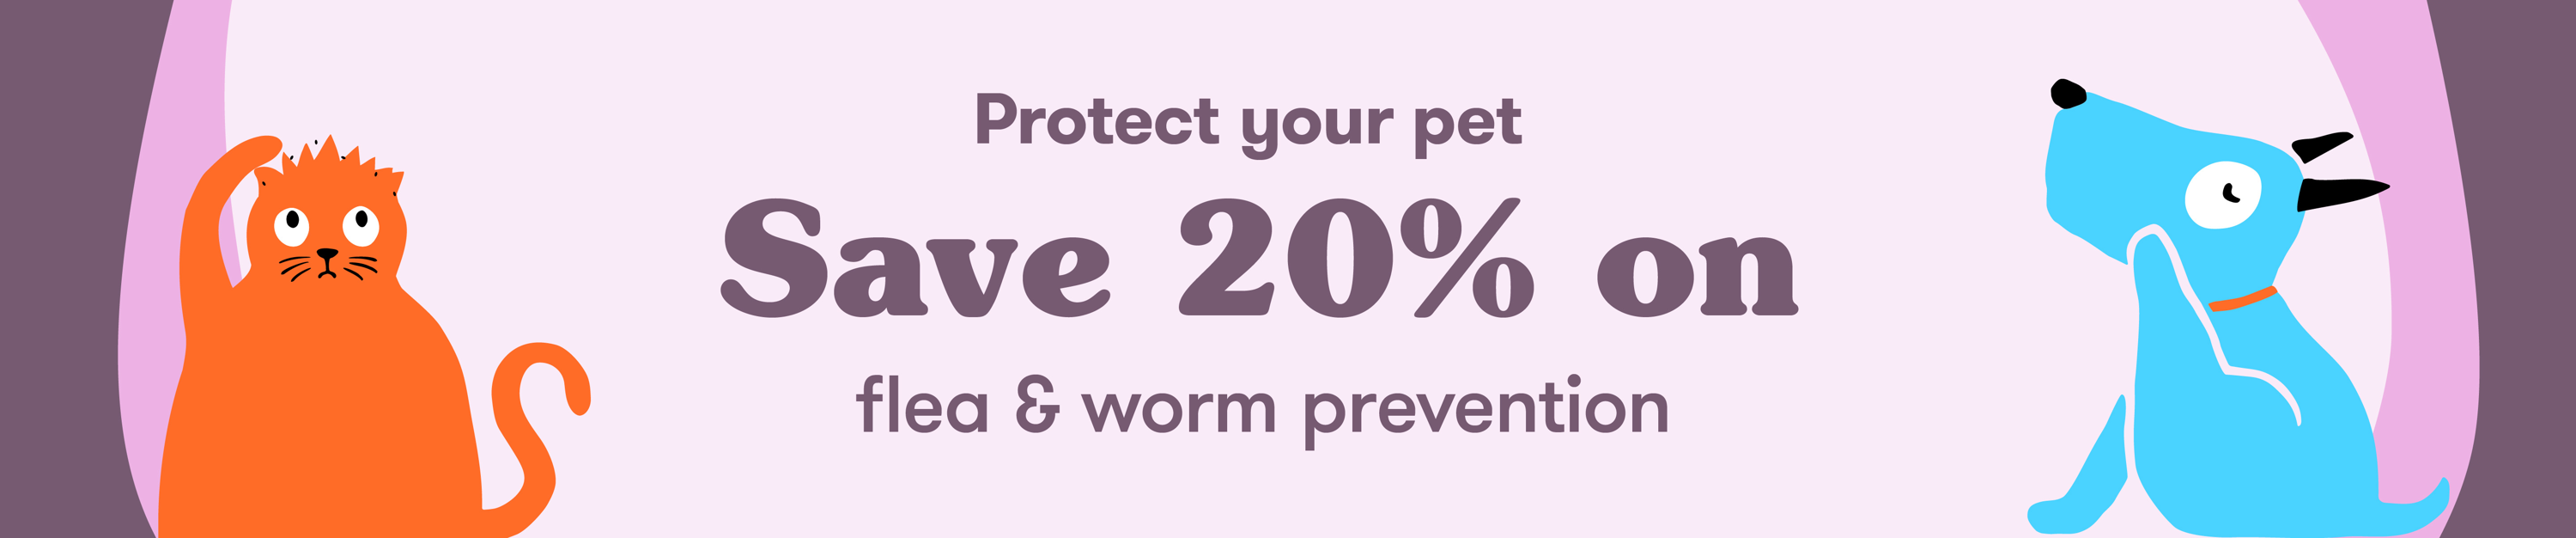 Protect your pet all year round